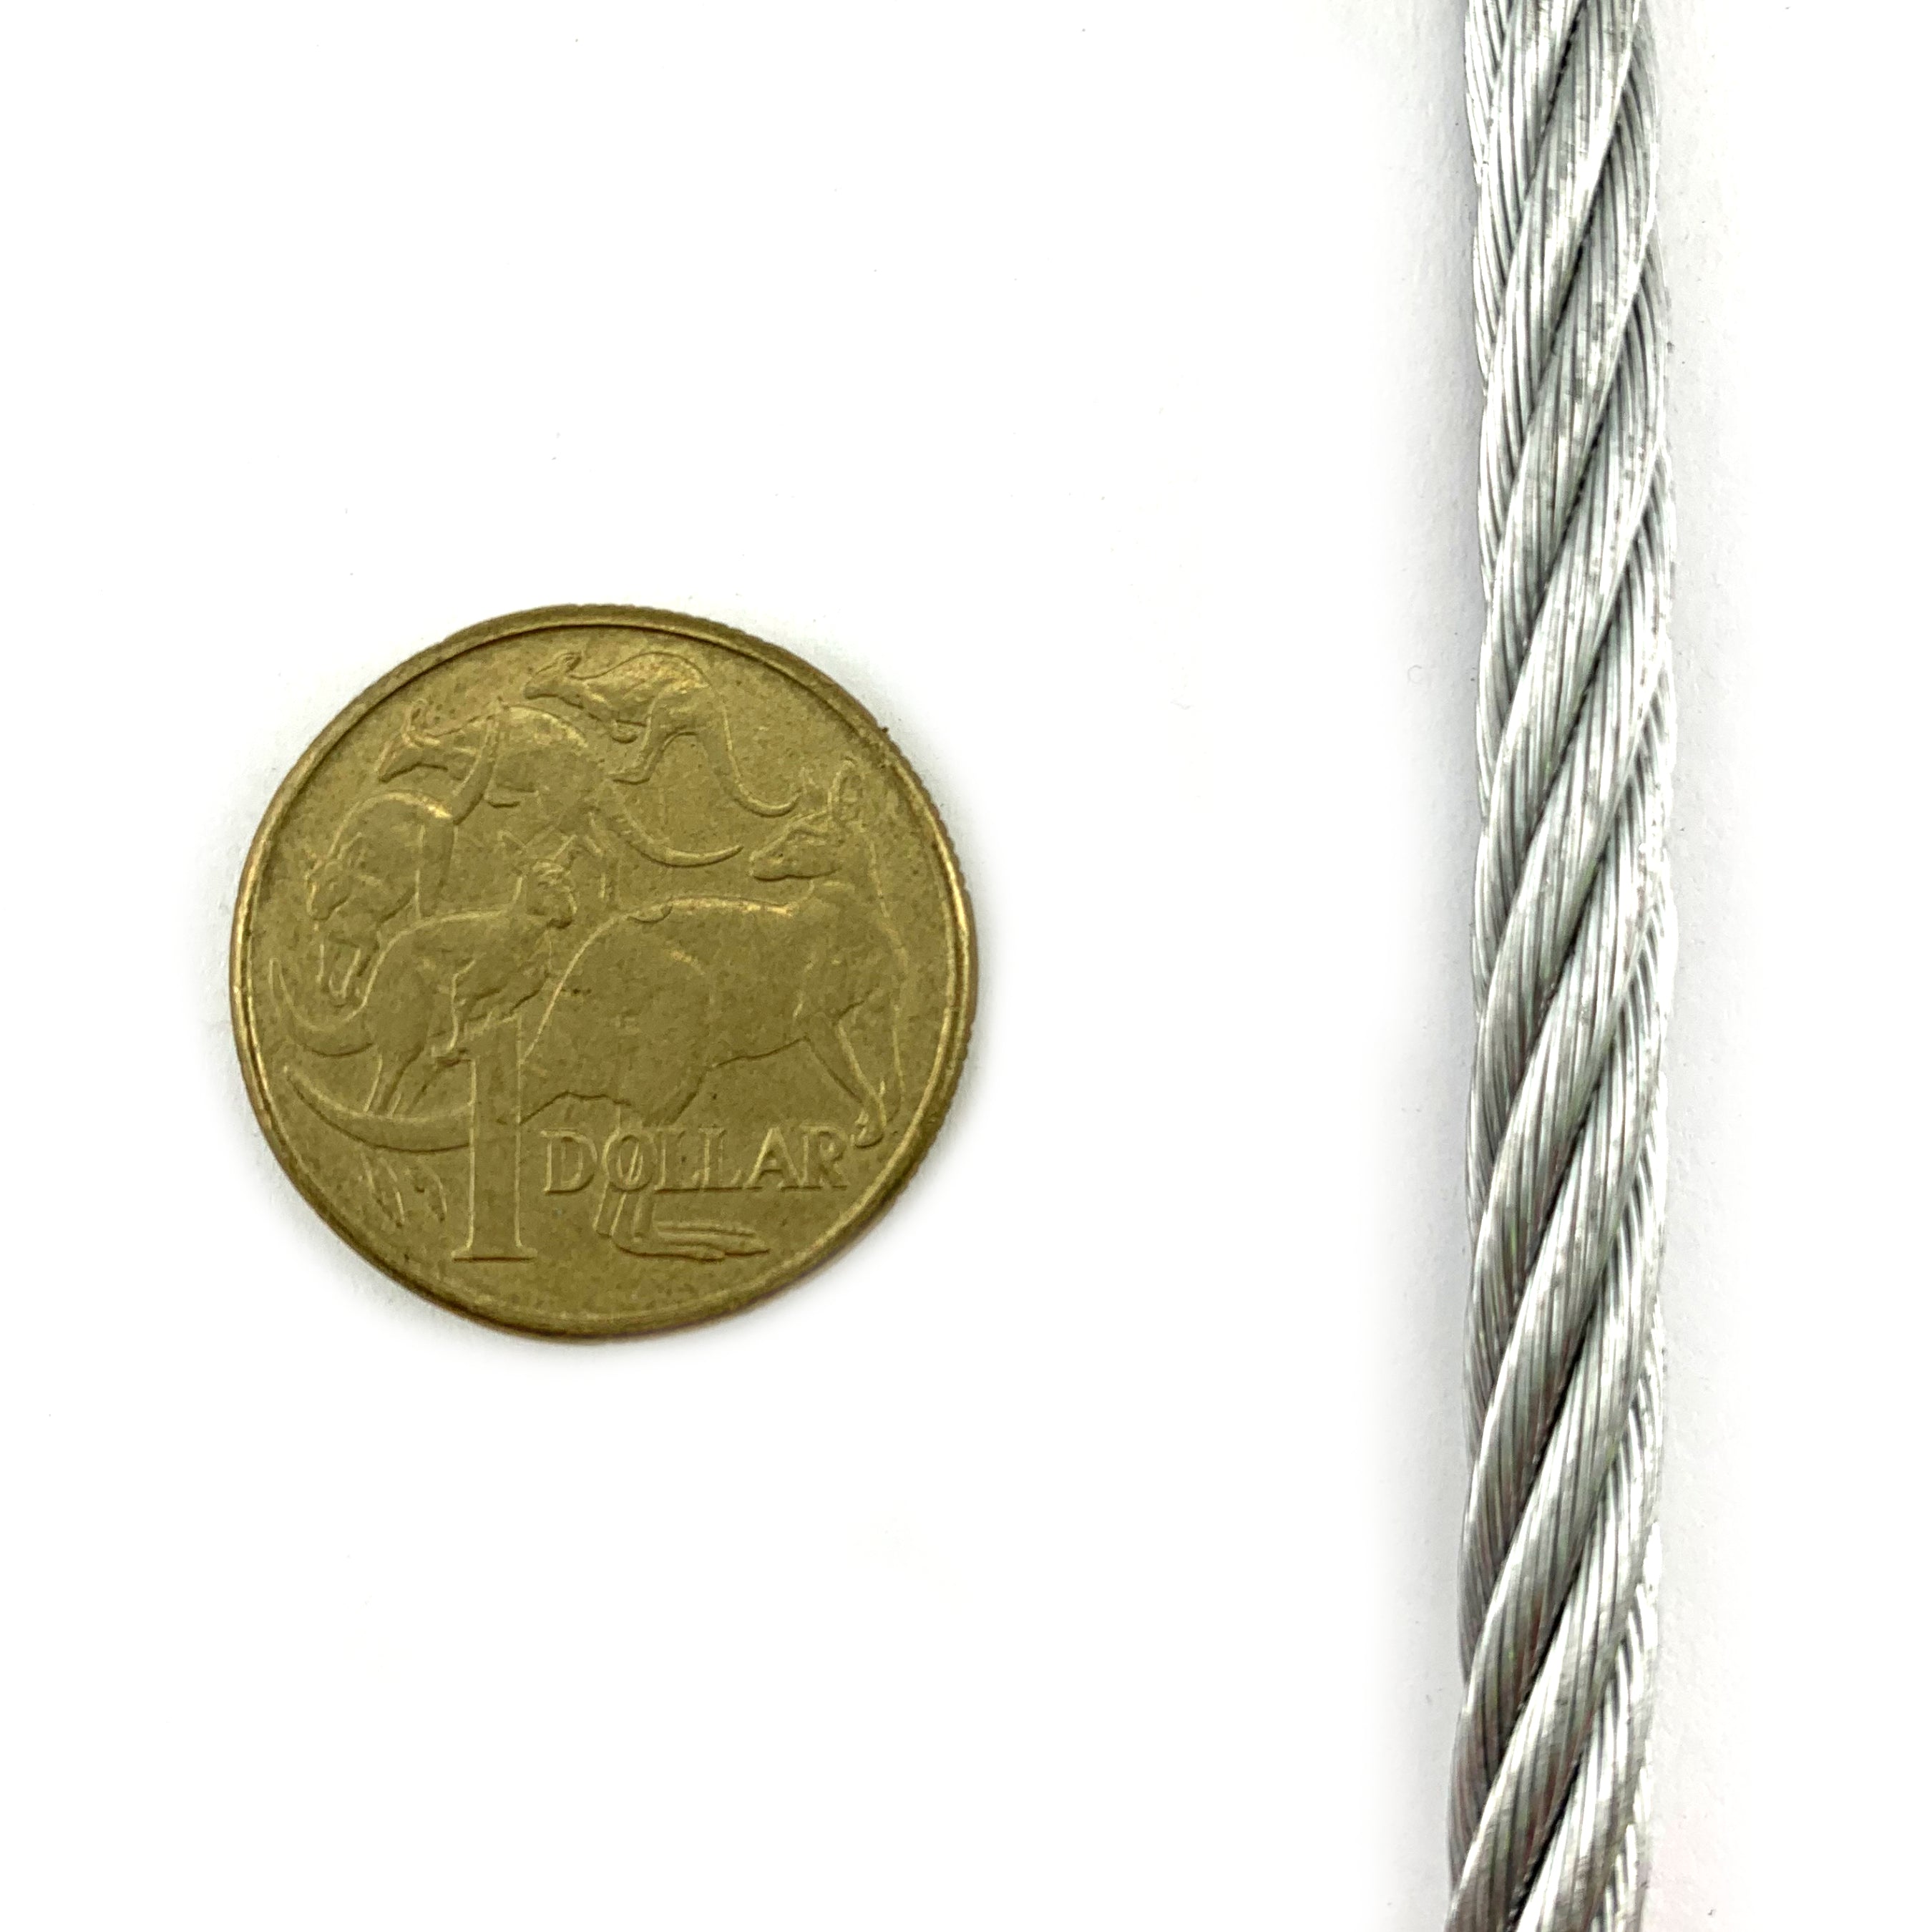 6mm galvanised wire rope, construction type: 7/19 on a 50-metre reel. Australia.